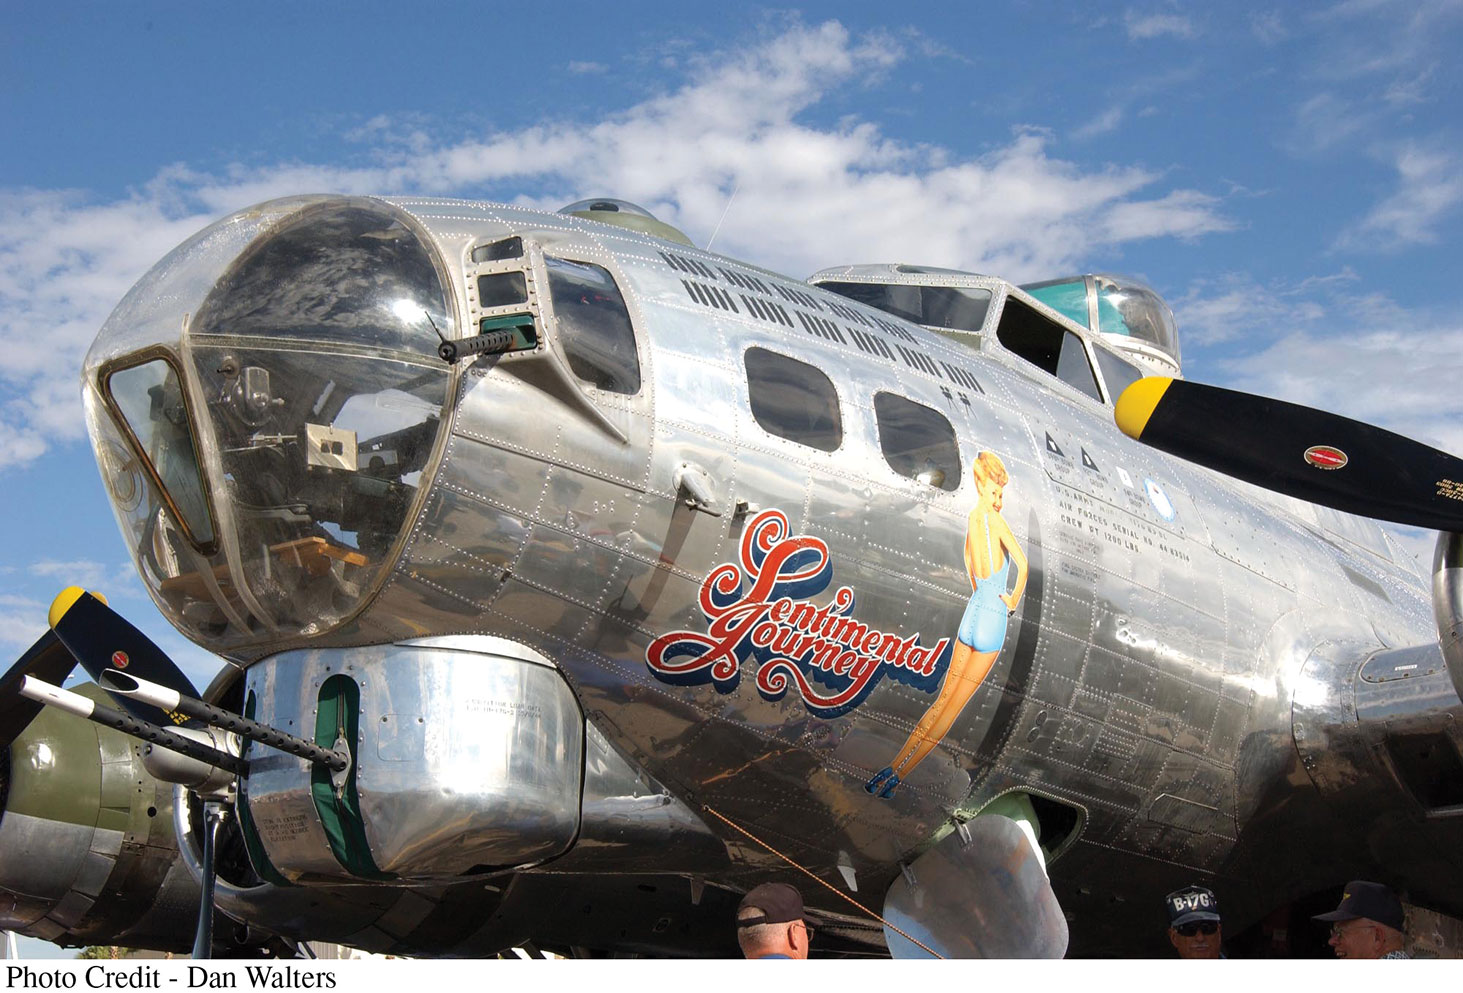 Sentimental Journey - a fully restored B-17 Flying Fortress; photo by Dan Walters